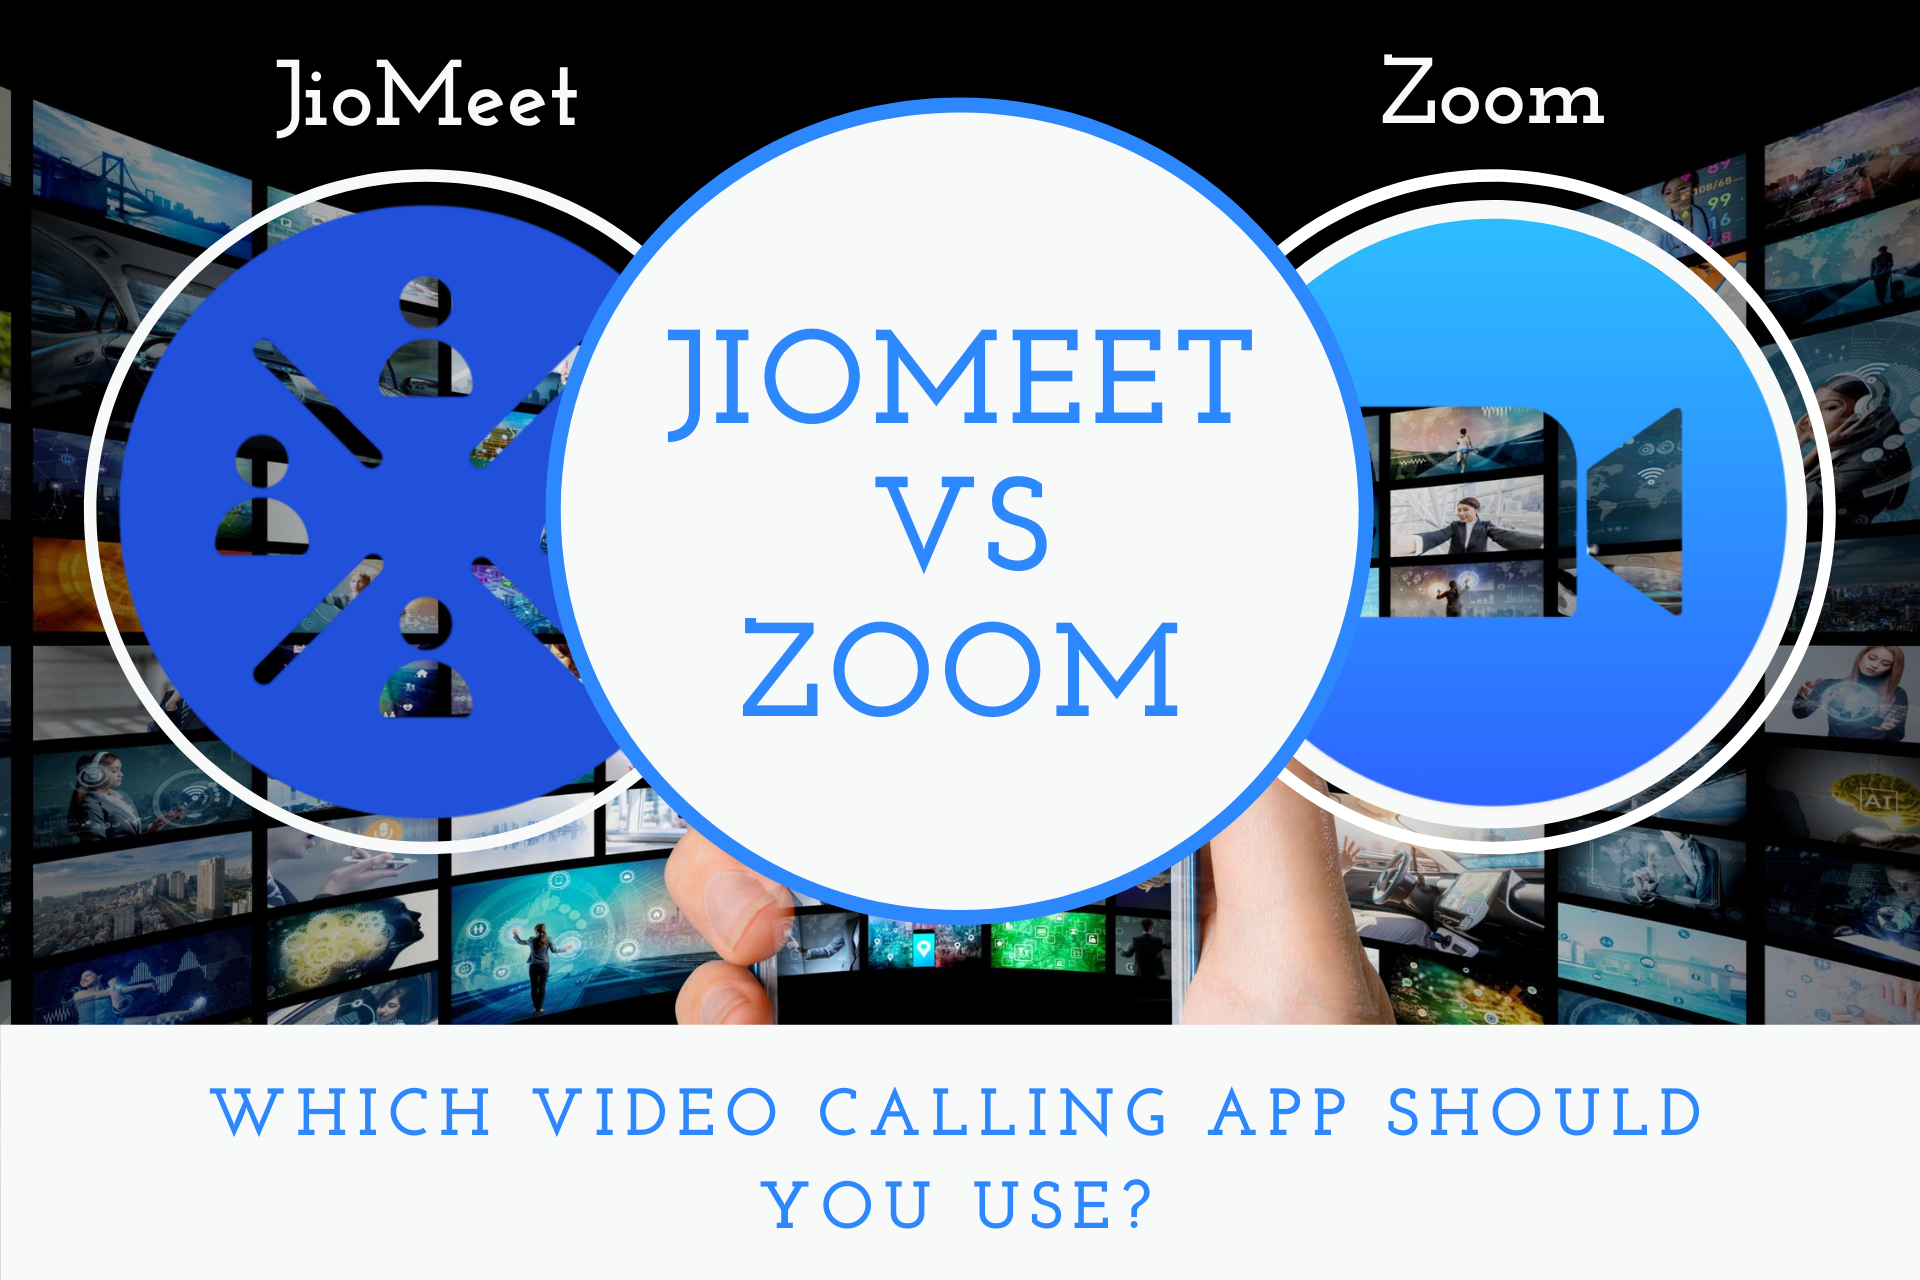 JioMeet vs Zoom: Which video calling app should you use?